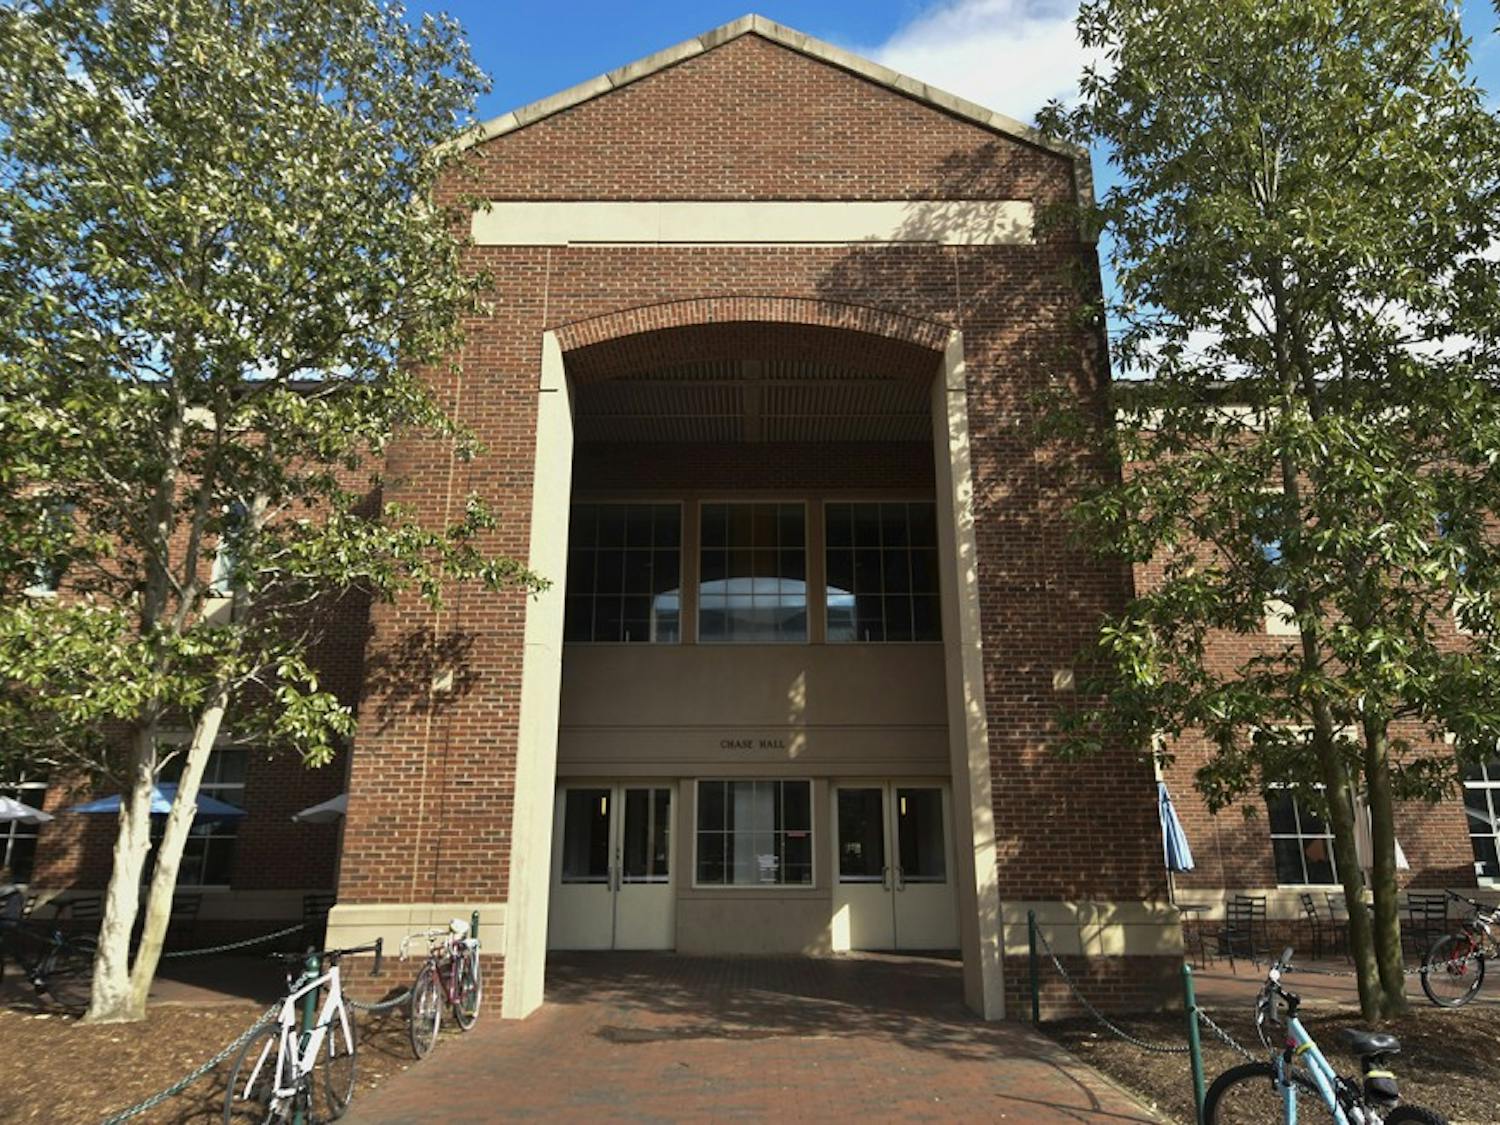 A committee&nbsp;is attempting&nbsp;to rebrand Rams Head Dining Hall at Chase Hall to Chase Dining Hall at Rams Head Plaza to honor former UNC president Harry Chase.